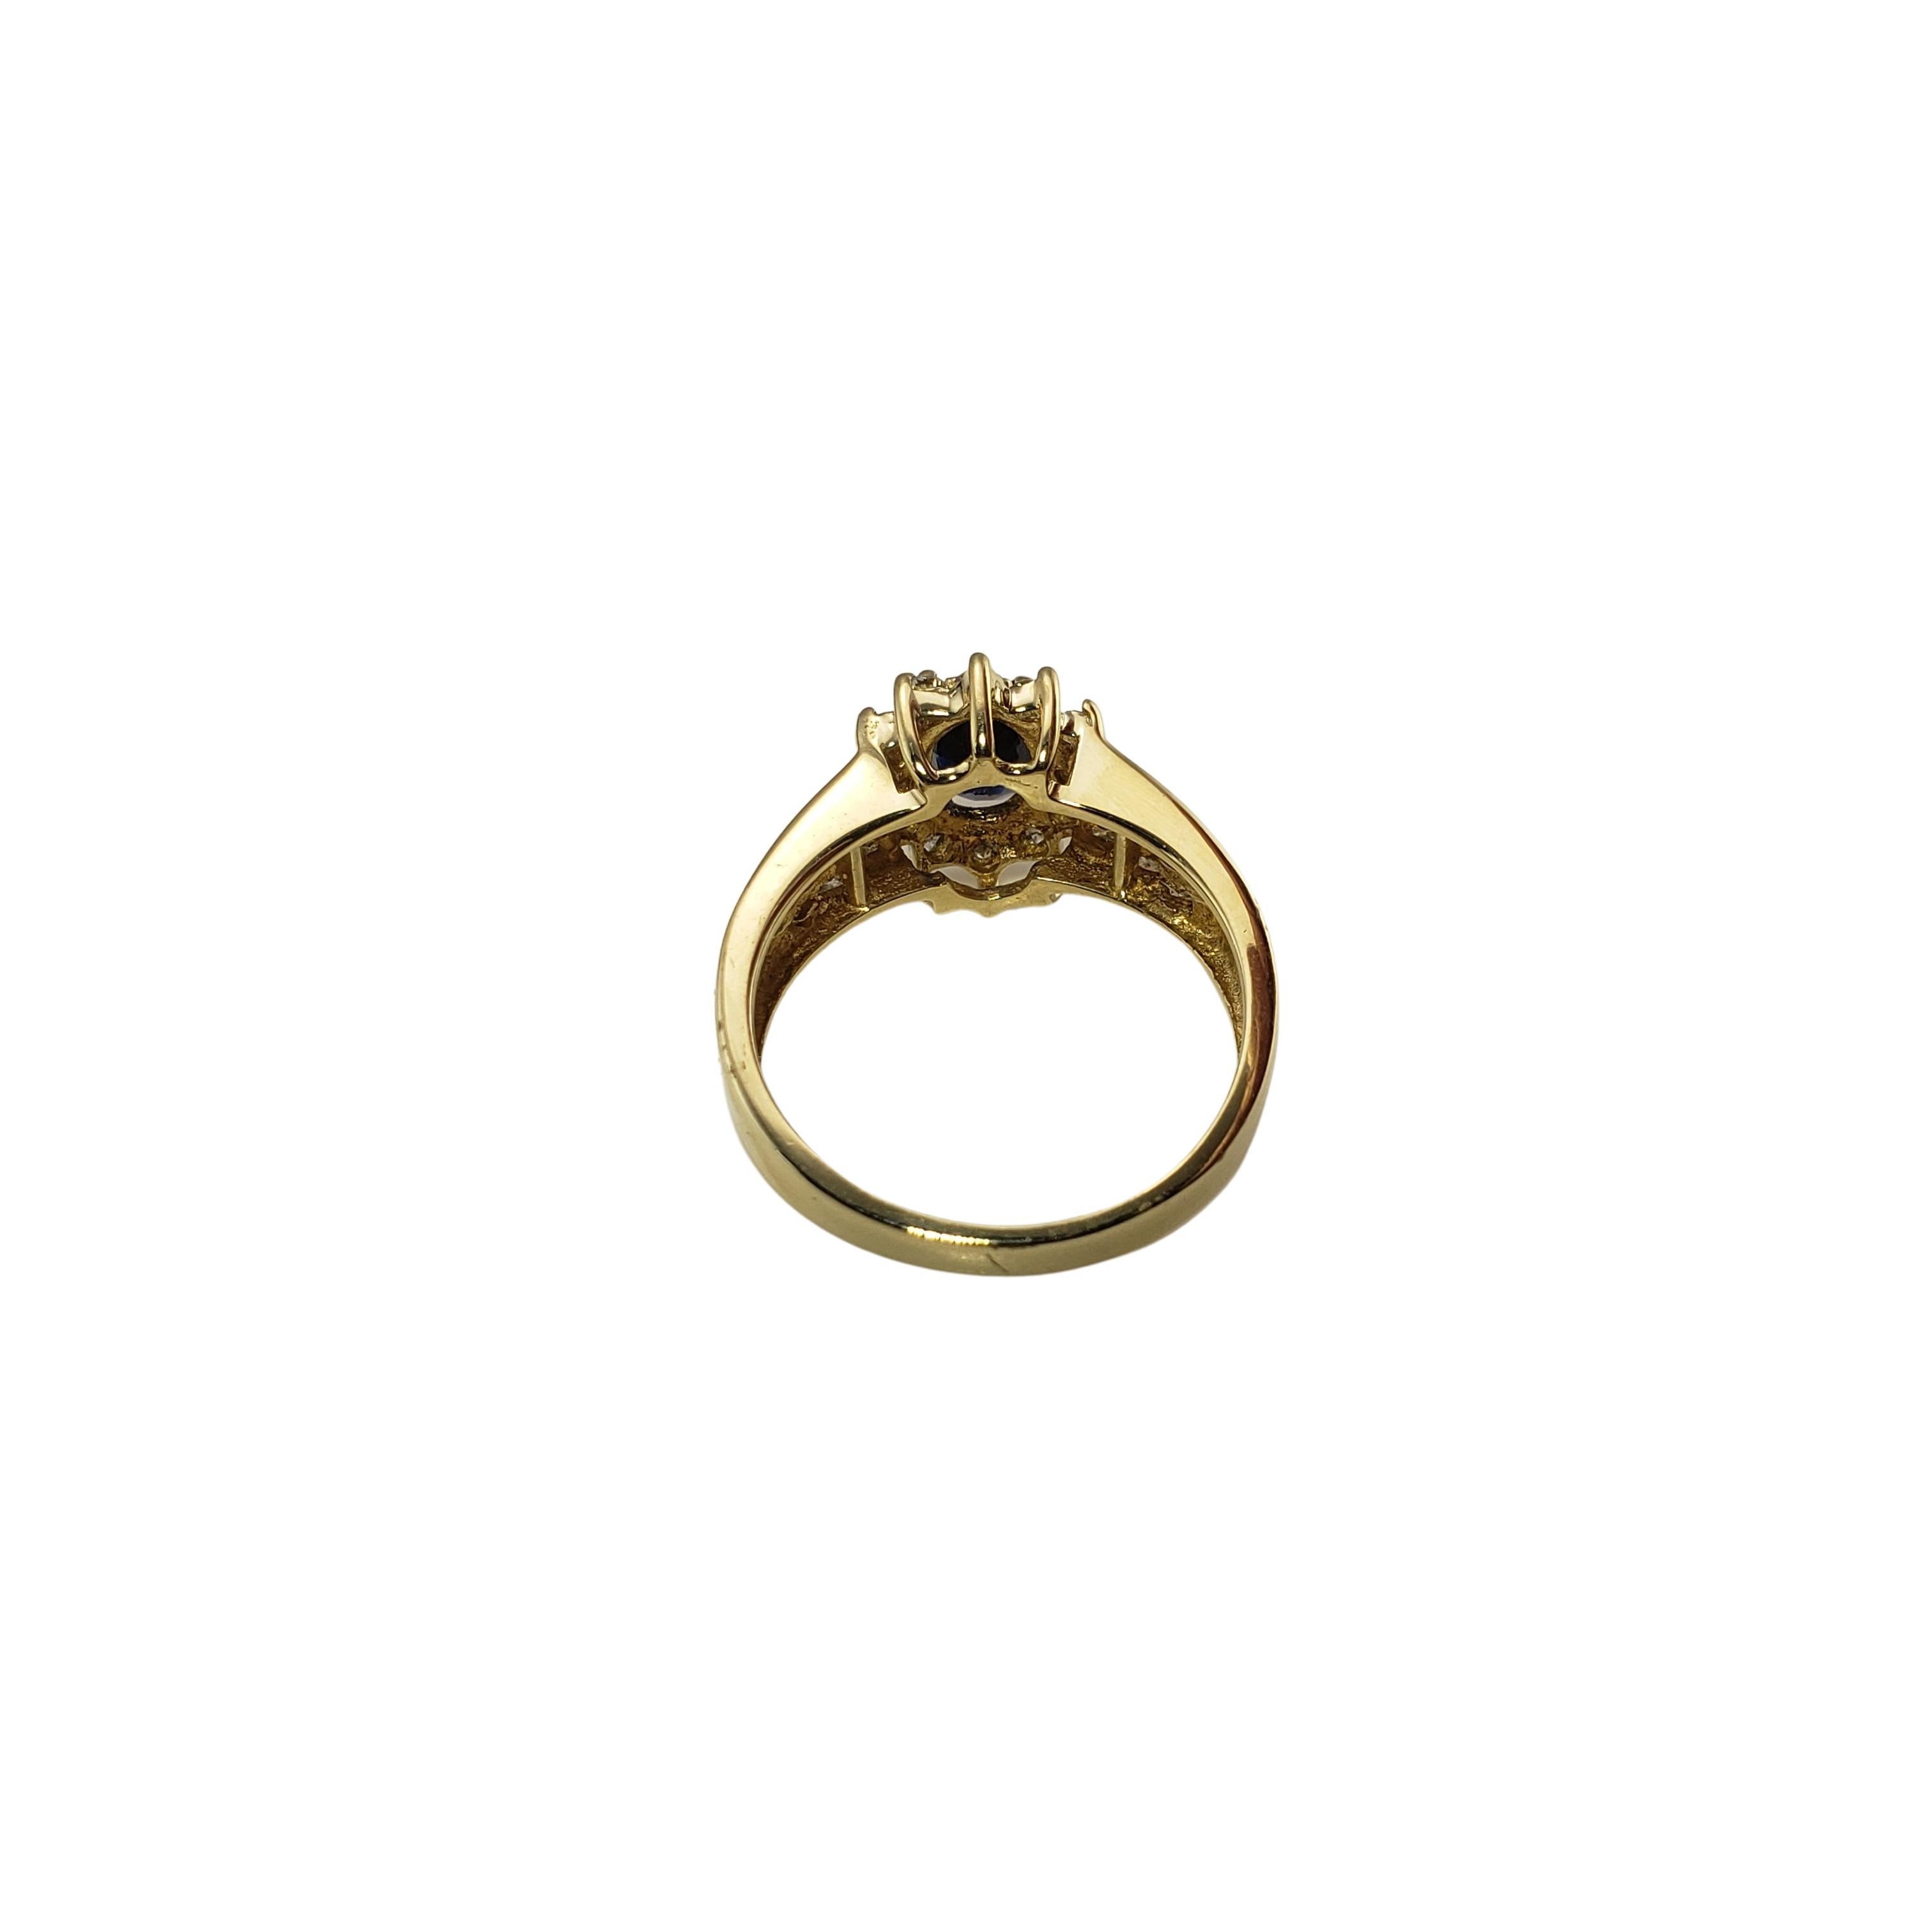 Vintage 14 Karat Yellow Gold Sapphire and Diamond Ring Size 7-

This lovely ring features one oval sapphire (7 mm x 5 mm) accented with 24 round brilliant cut diamonds set in classic 14K yellow gold. Width: 11 mm. Shank: 2 mm.

Approximate total